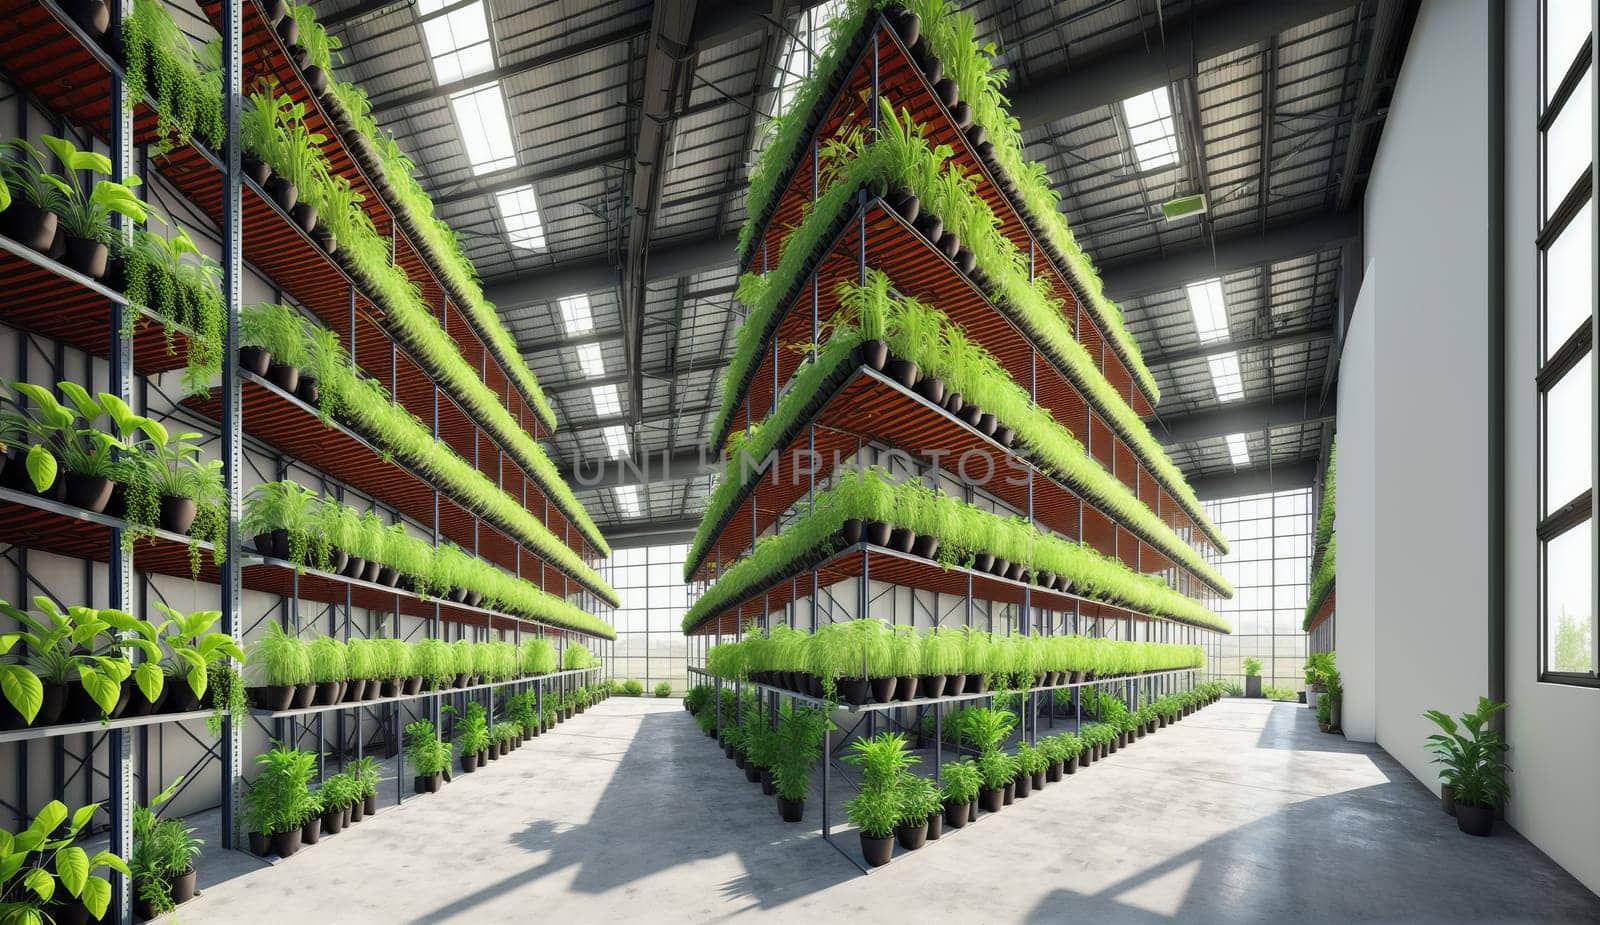 Urban design of building with glass facade, filled with potted plants on shelves by DCStudio